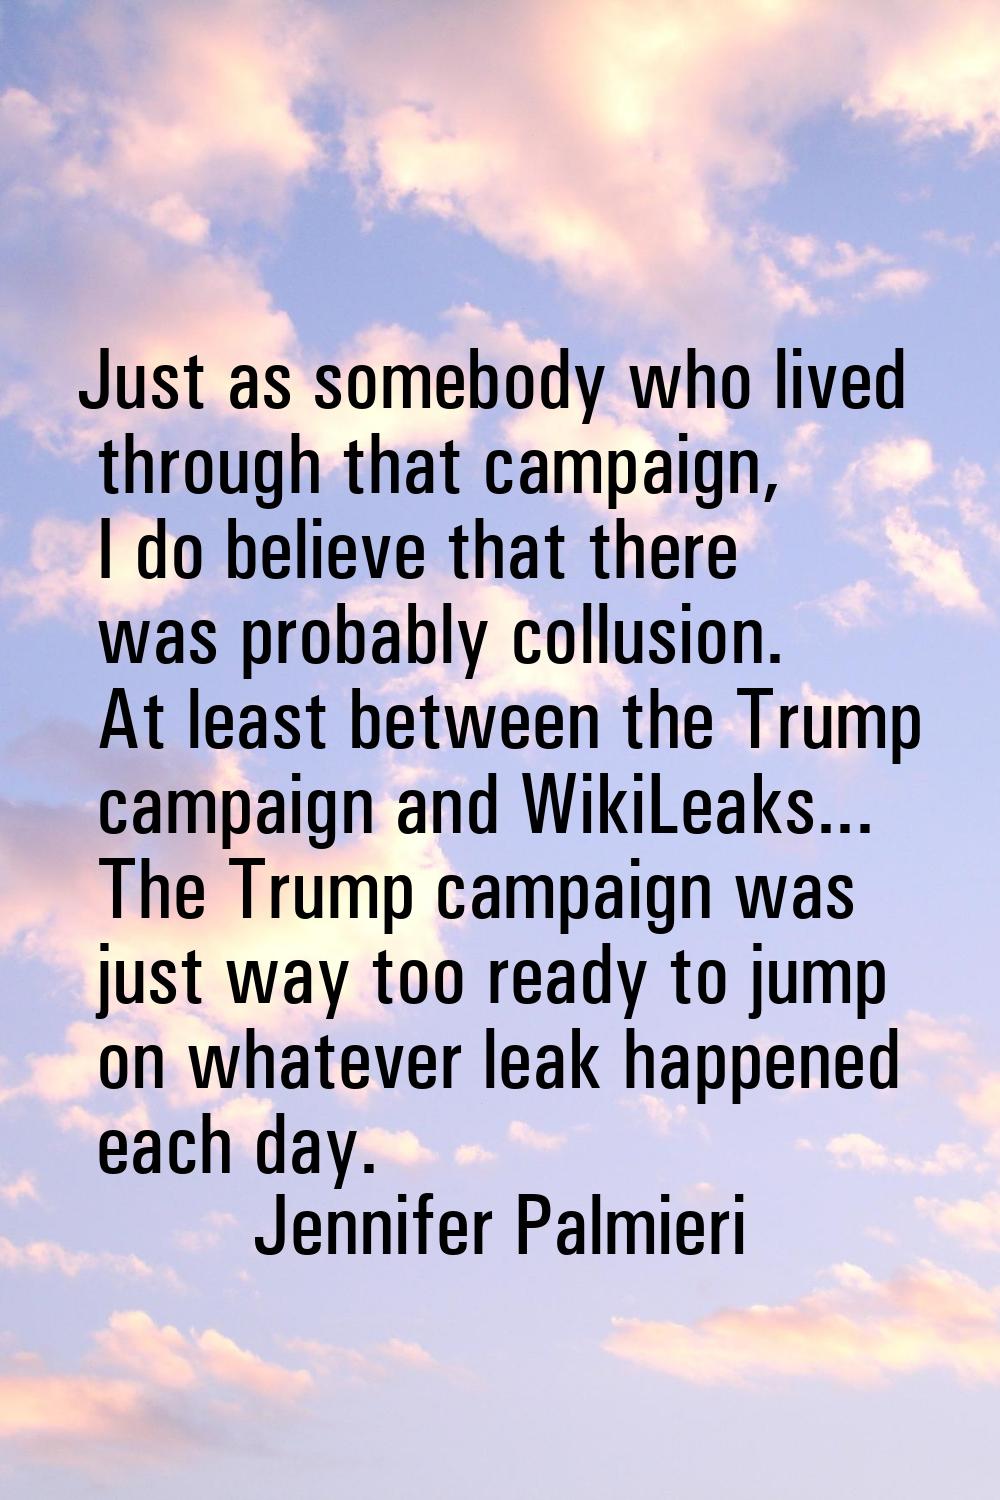 Just as somebody who lived through that campaign, I do believe that there was probably collusion. A